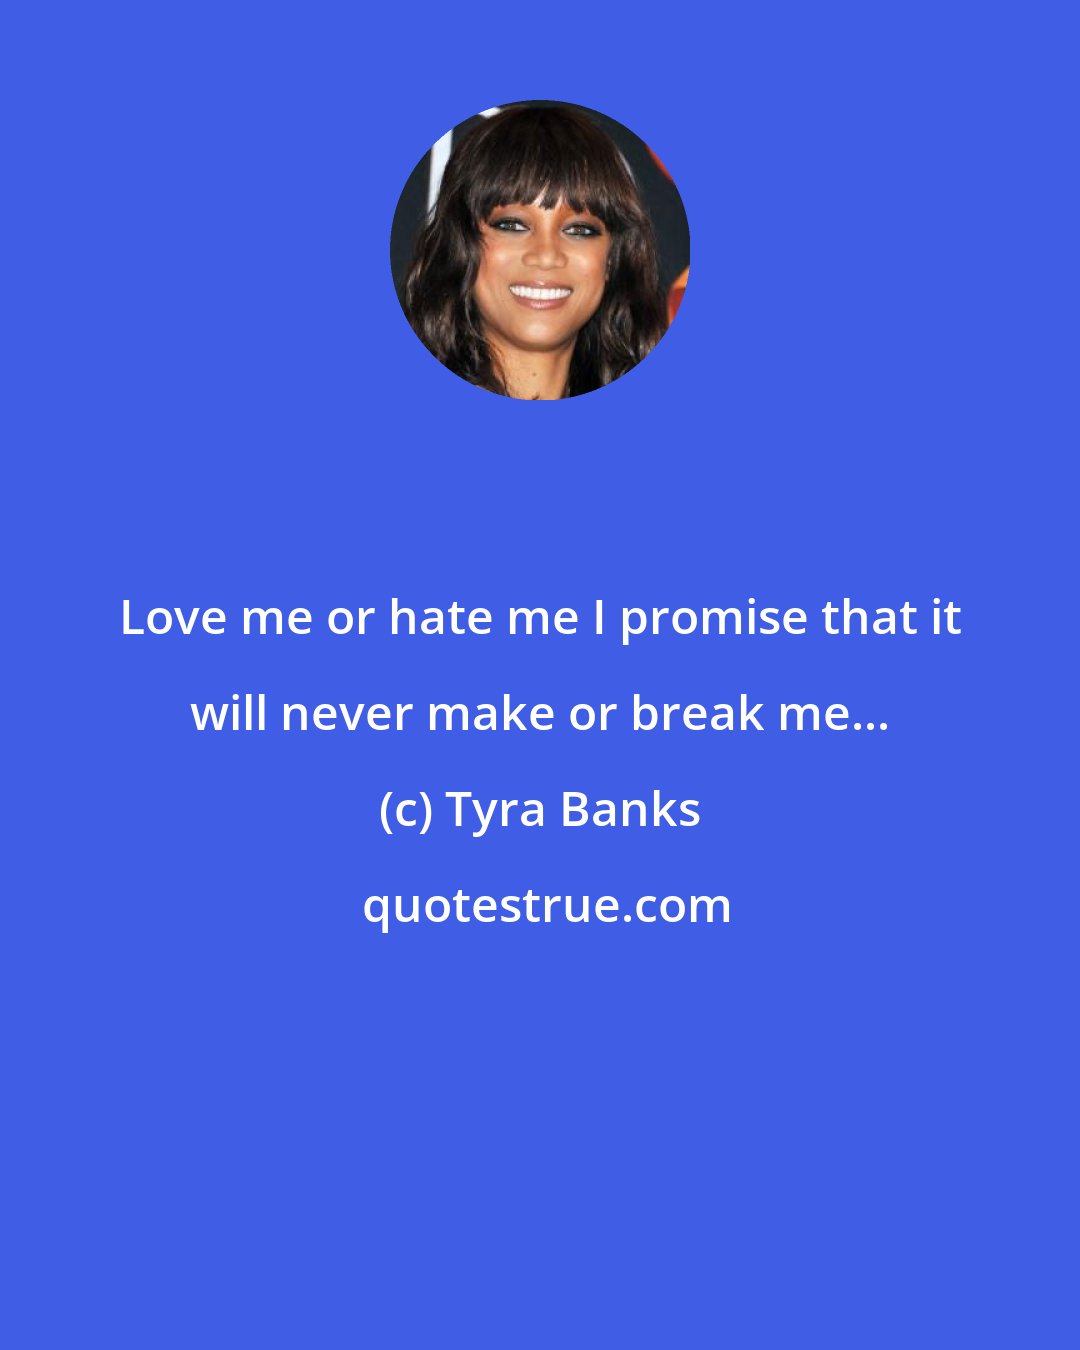 Tyra Banks: Love me or hate me I promise that it will never make or break me...